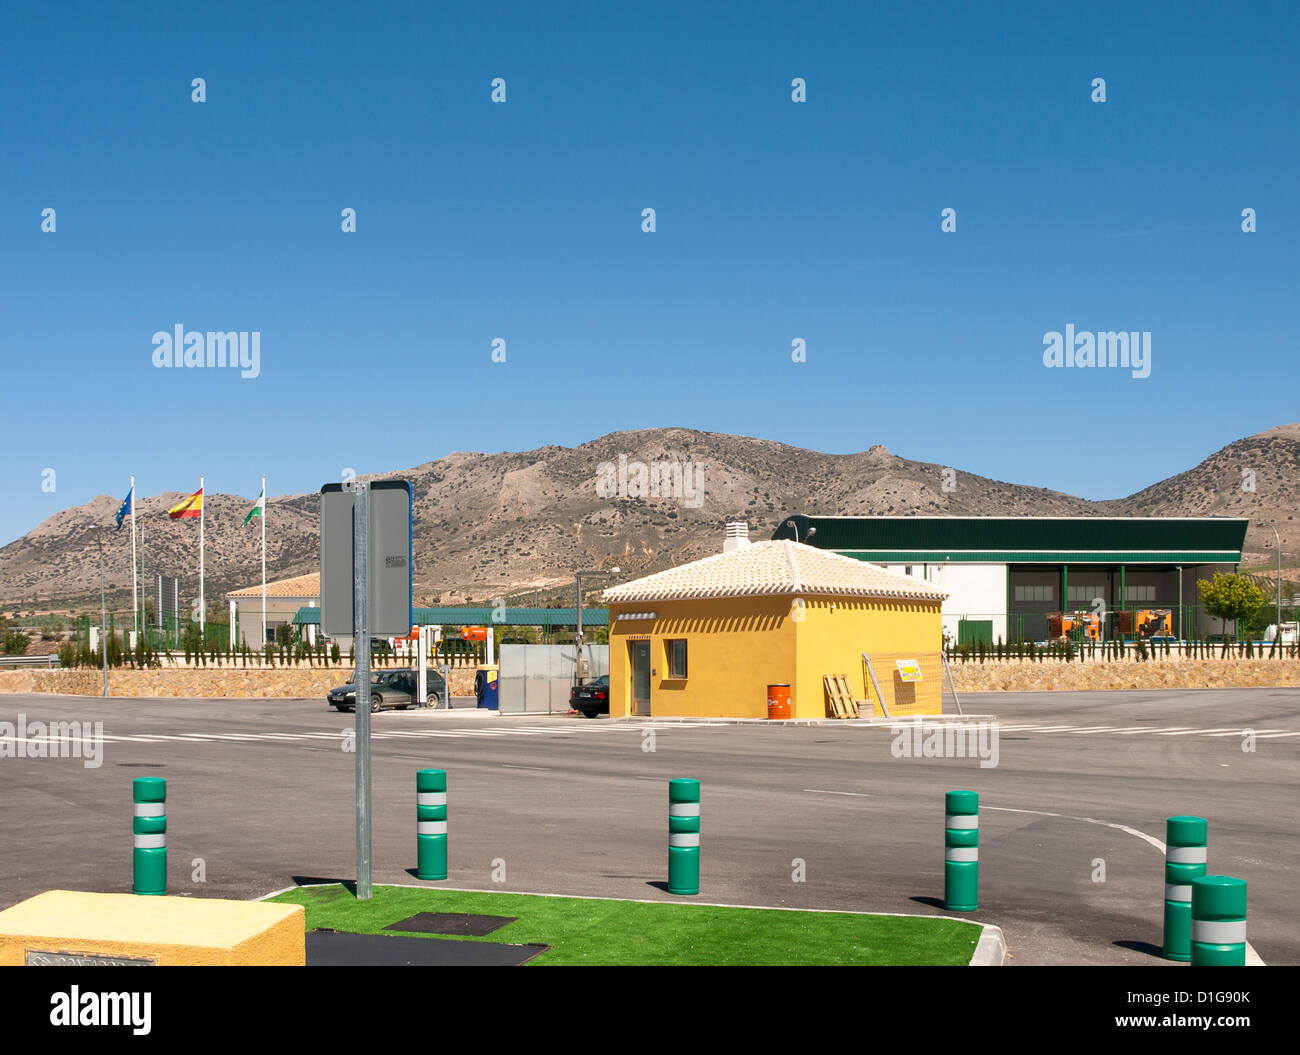 Roadside stop, highway rest area with petrol station, restaurant and restrooms in Andalusia Spain Stock Photo